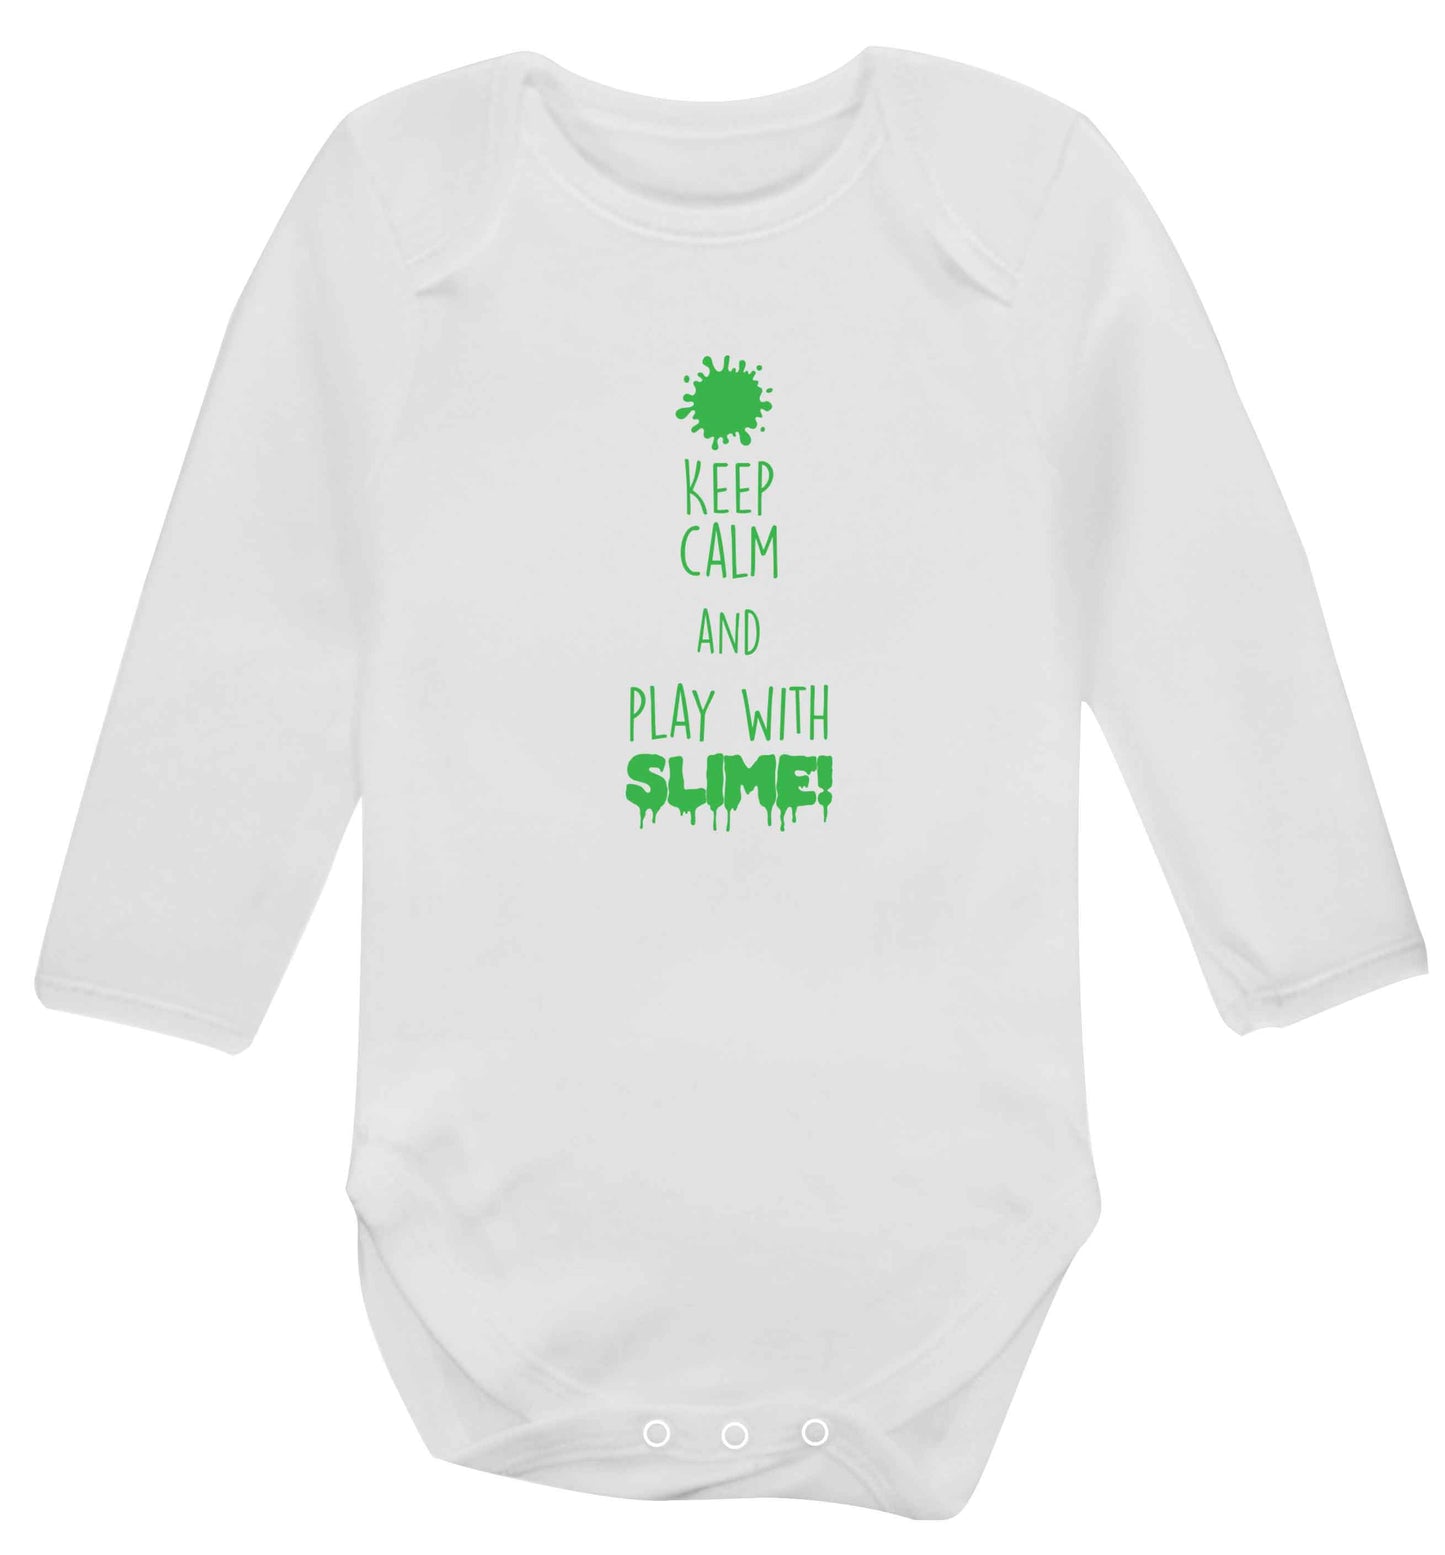 Neon green keep calm and play with slime!baby vest long sleeved white 6-12 months